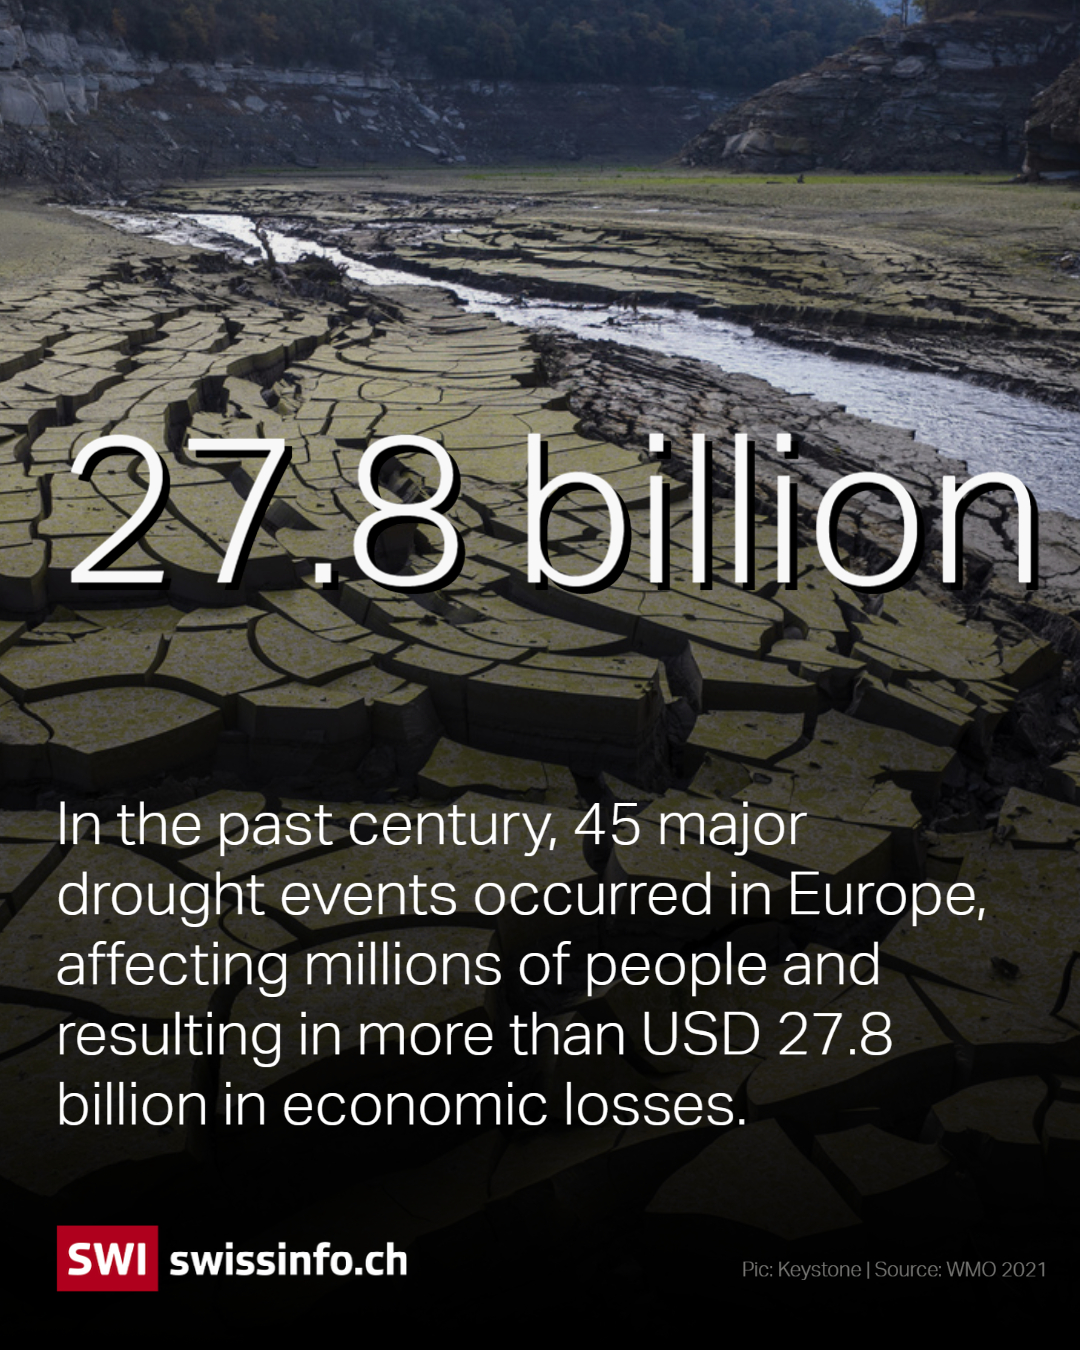 45 major droughts have occurred in Europe in the past century with USD27.8 billion in costs